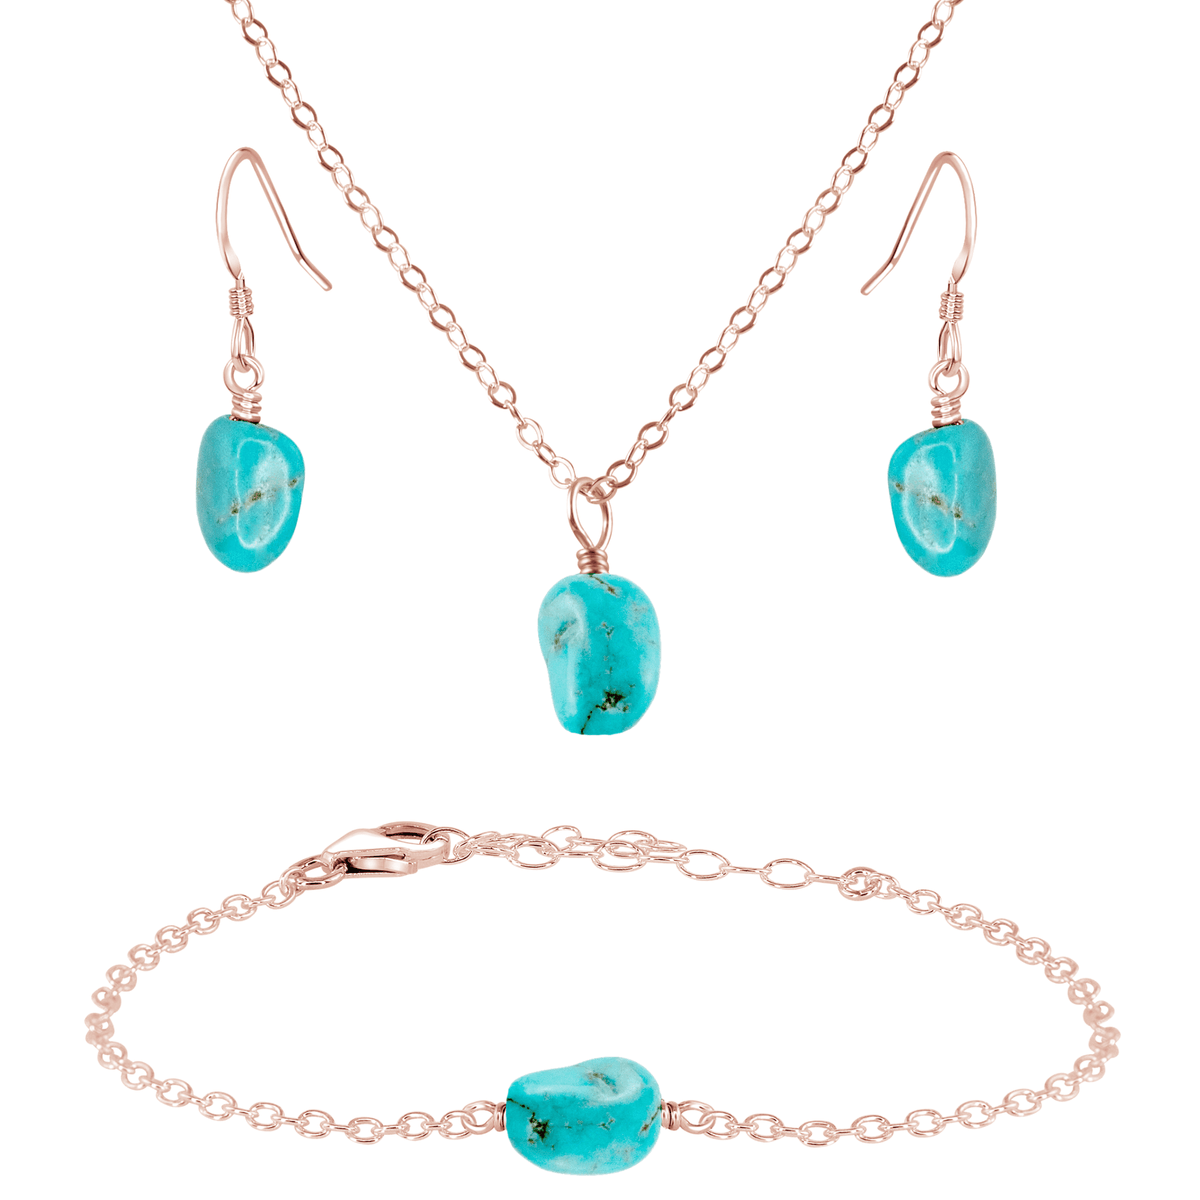 Raw Turquoise Crystal Earrings, Necklace & Bracelet Set - Raw Turquoise Crystal Earrings, Necklace & Bracelet Set - 14k Rose Gold Fill - Luna Tide Handmade Crystal Jewellery